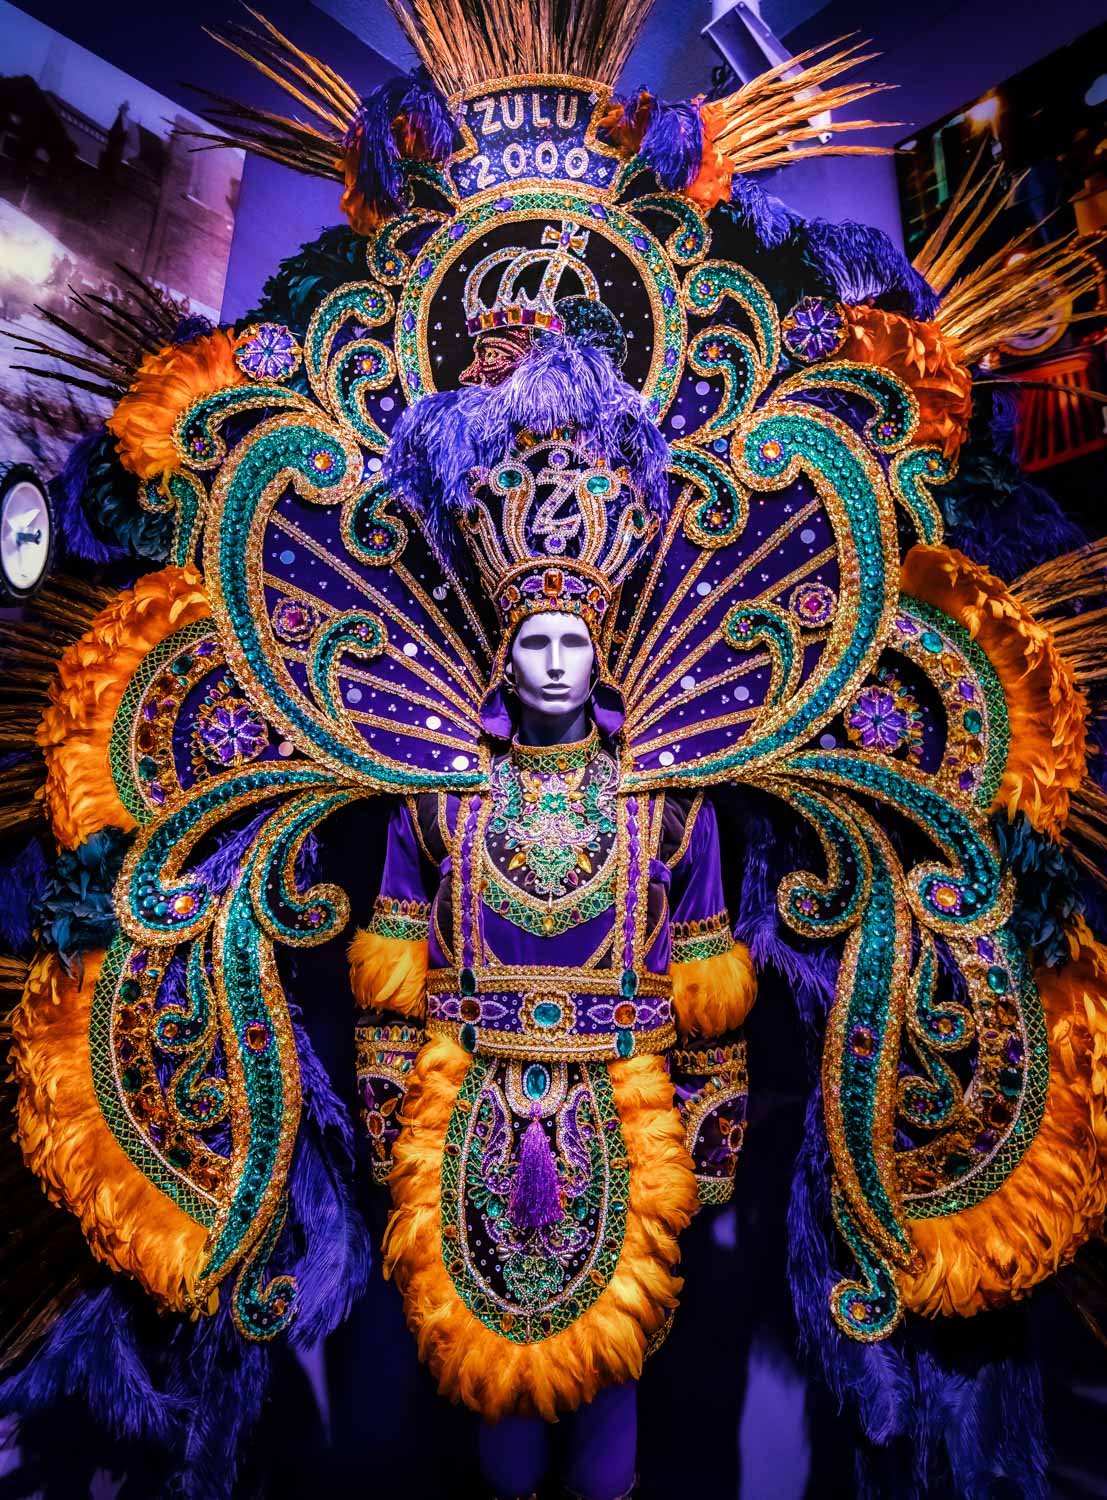 New Orleans Event Calendar 2022 Top 30 New Orleans Festival To Experience Before You Die (2022)